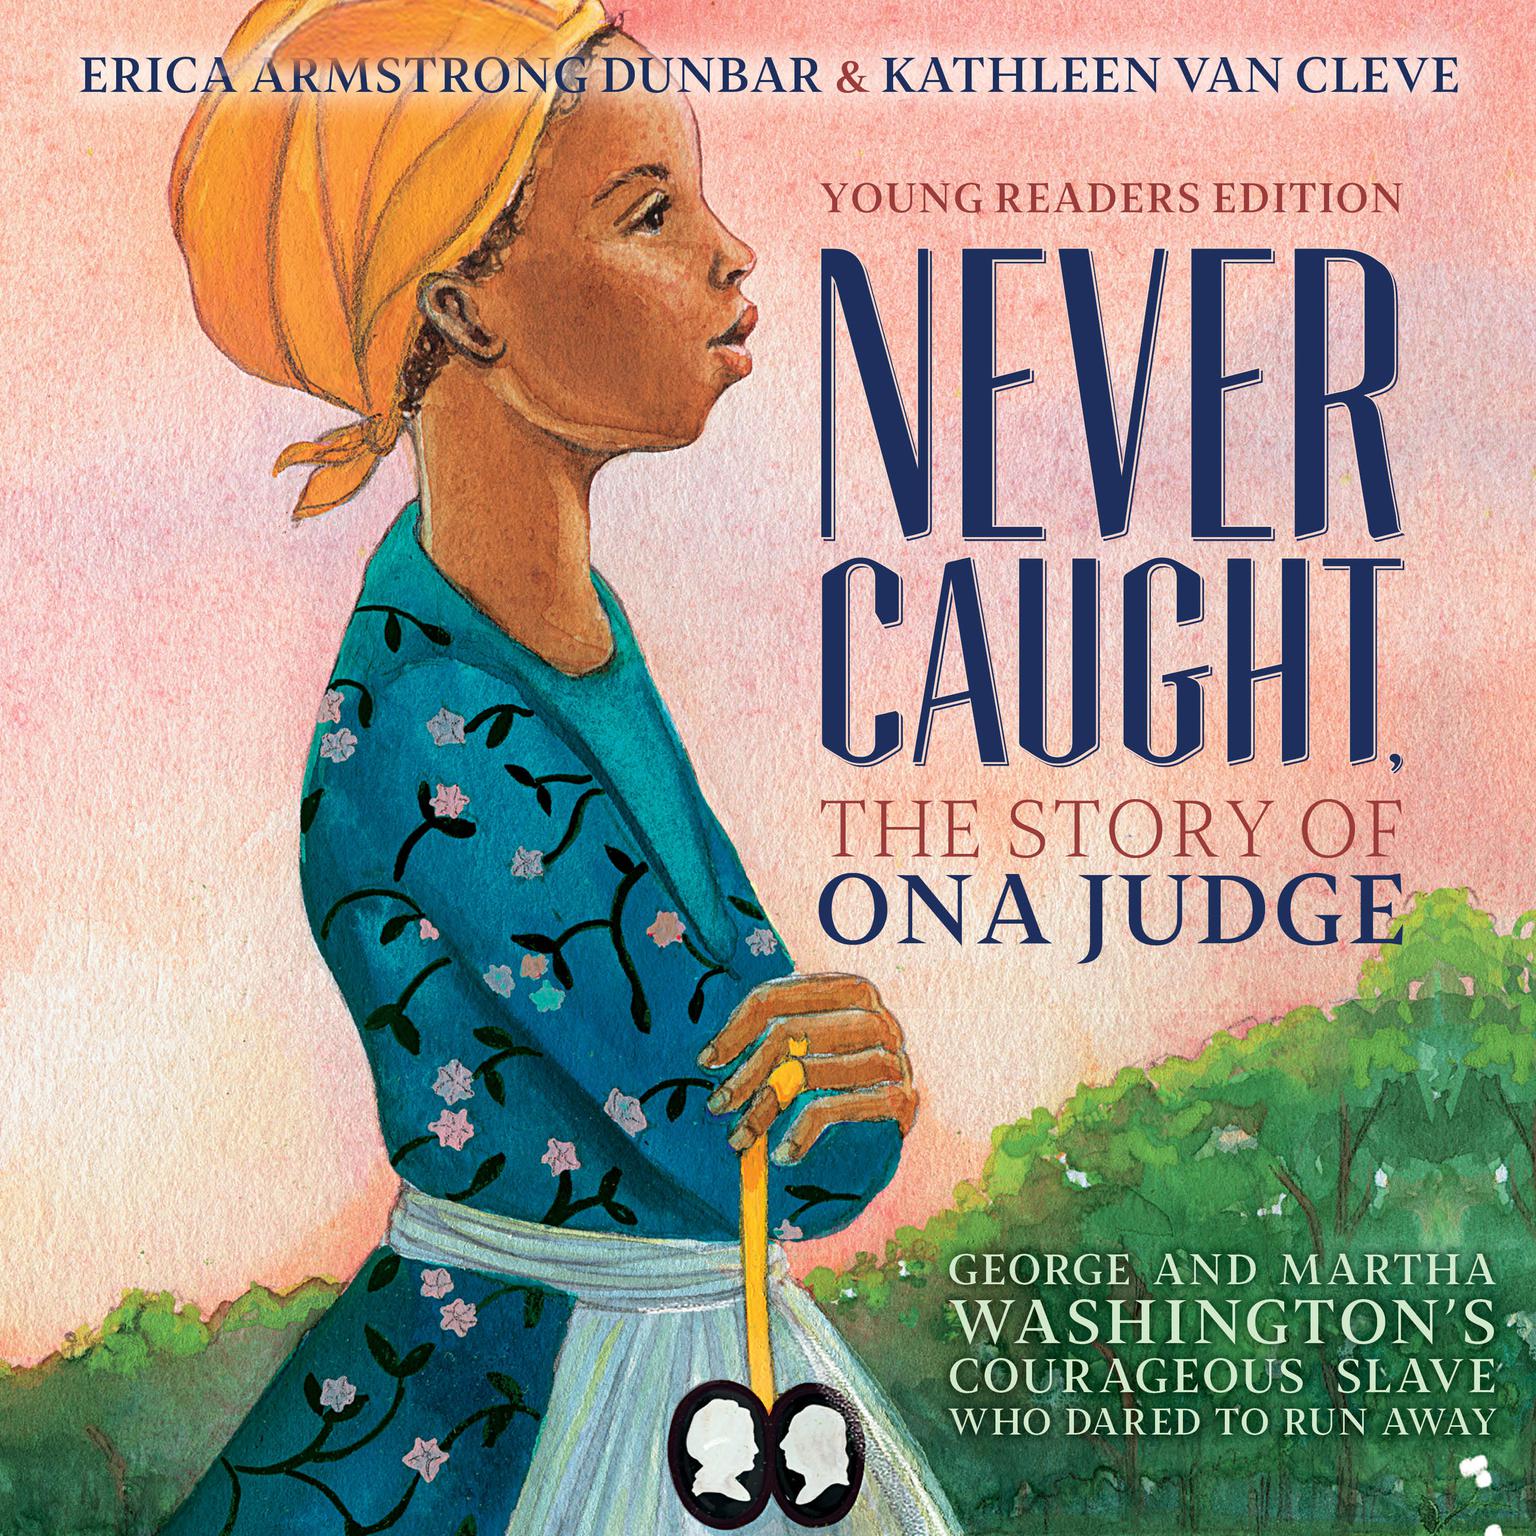 Never Caught, the Story of Ona Judge: George and Martha Washingtons Courageous Slave Who Dared to Run Away Audiobook, by Erica Armstrong Dunbar